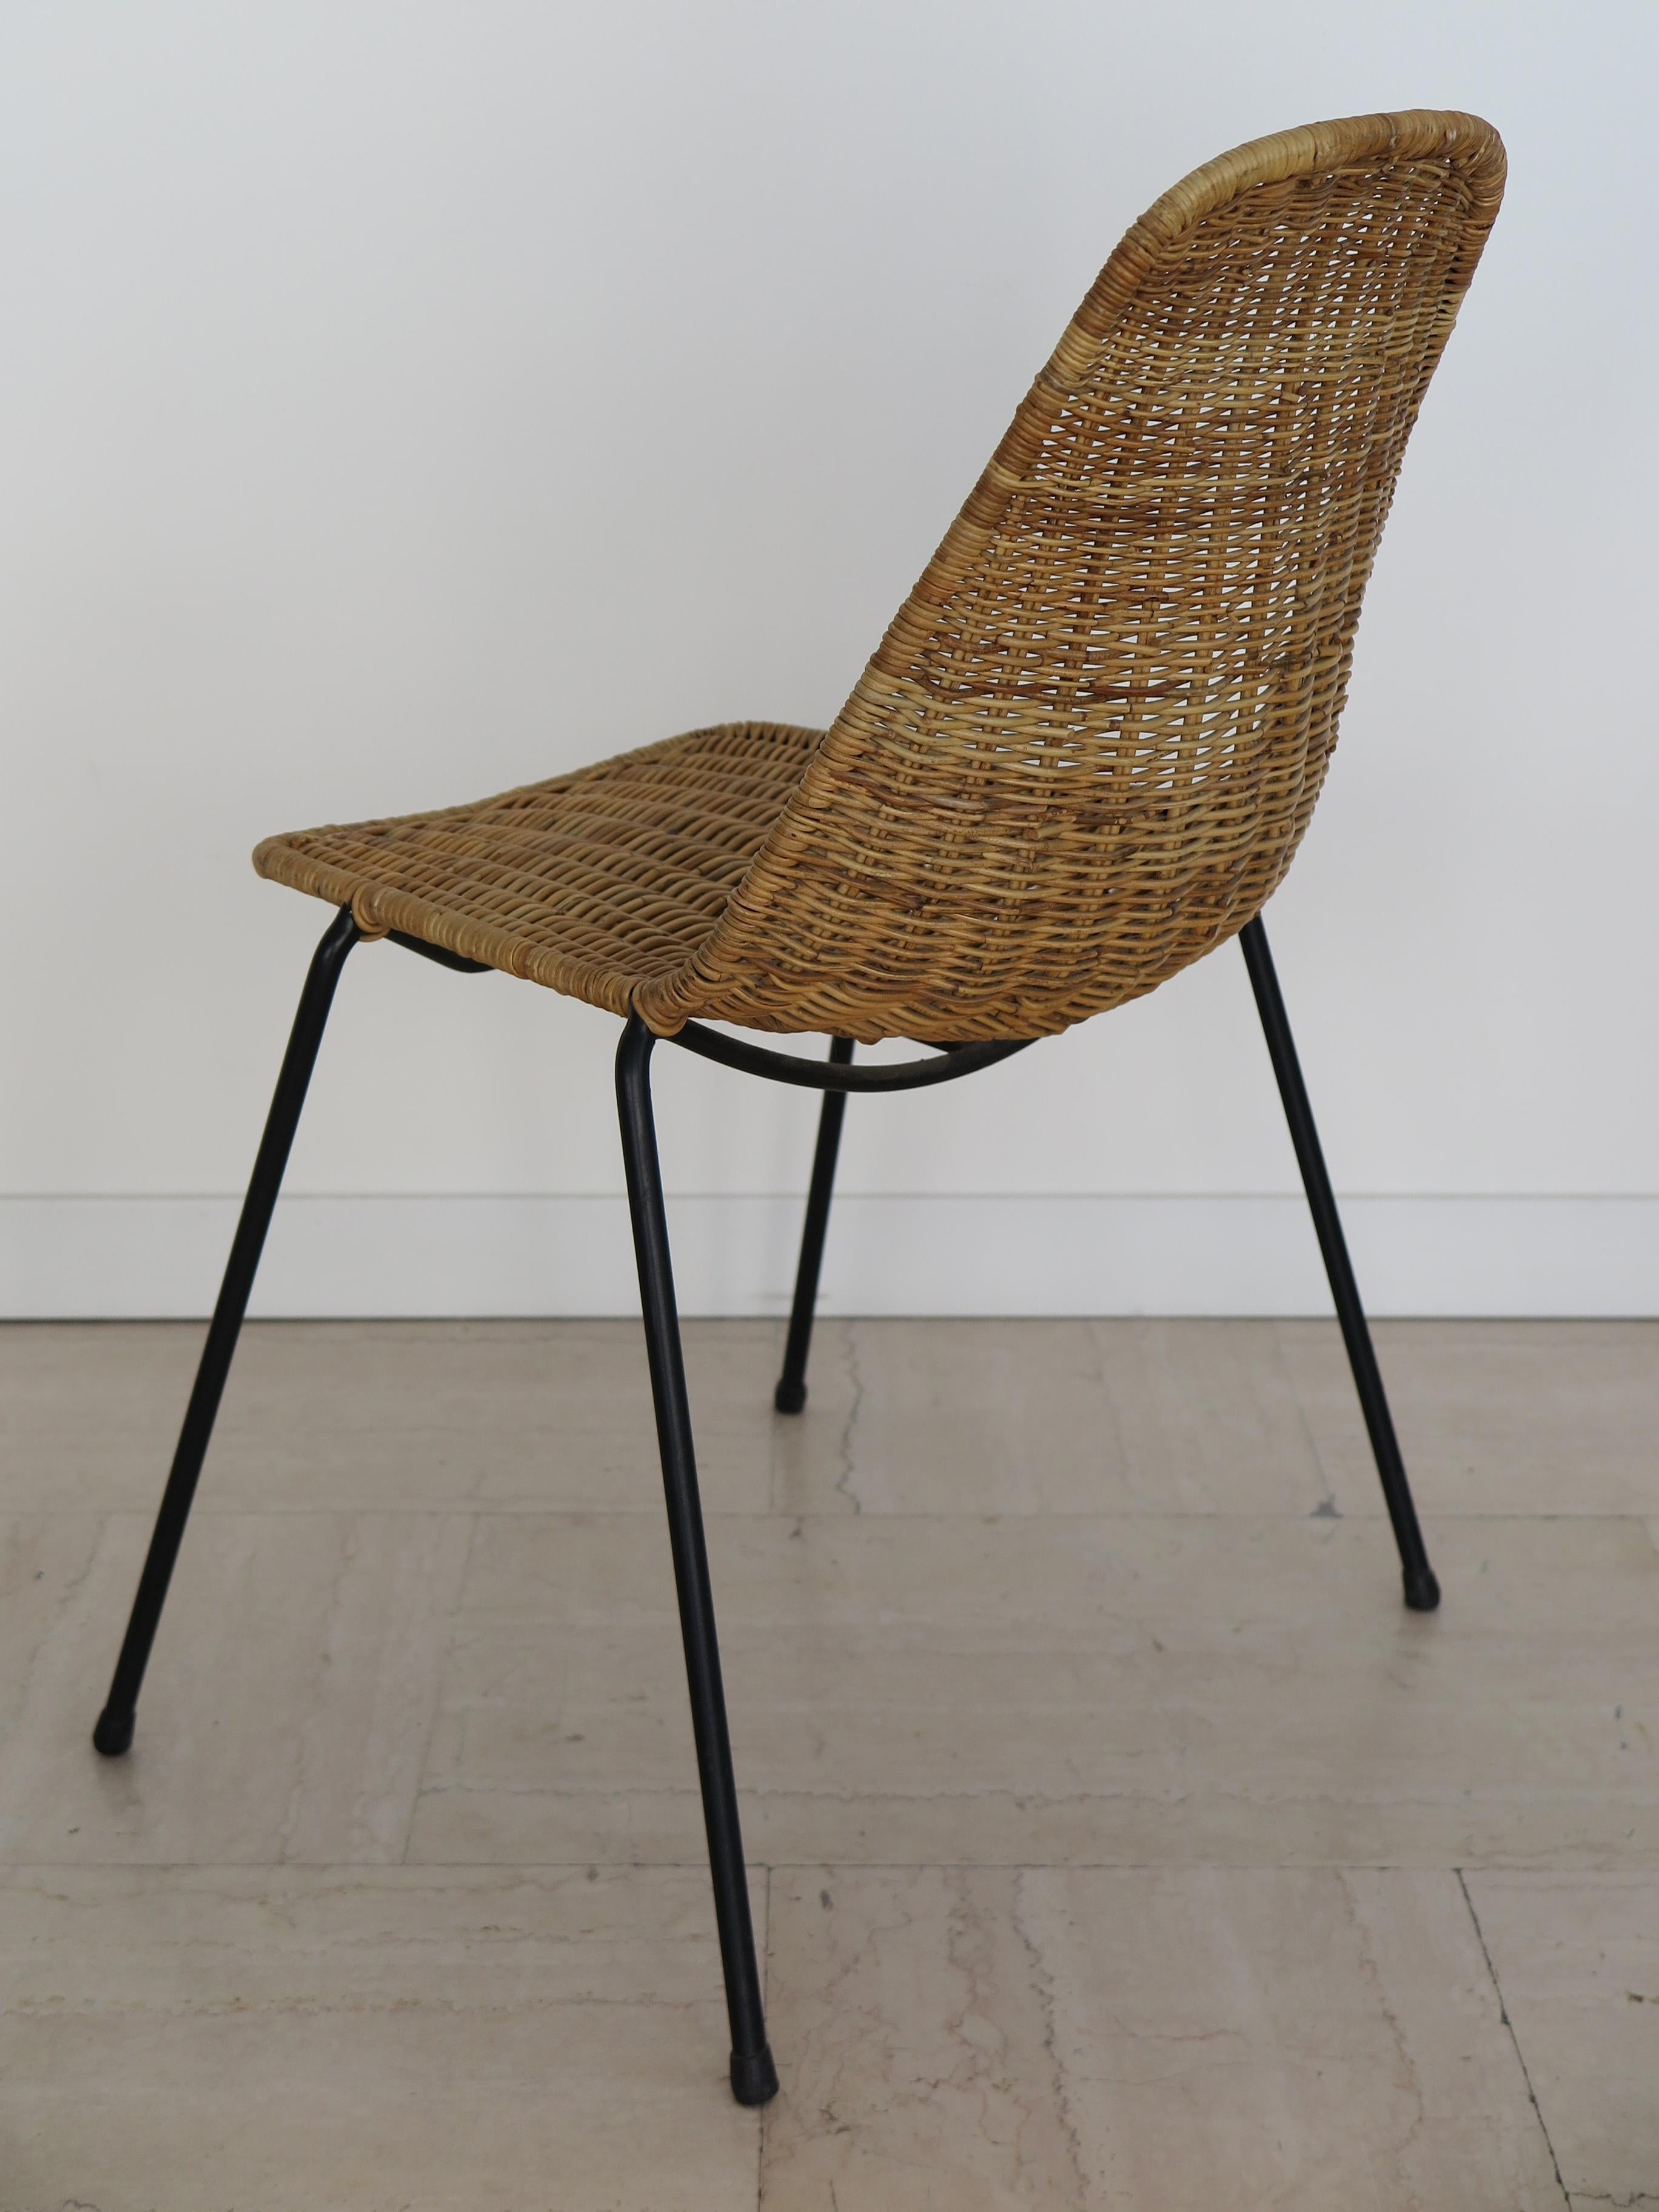 Italian Midcentury Rattan Dining Chairs Design Campo & Graffi for Home, 1950s For Sale 2